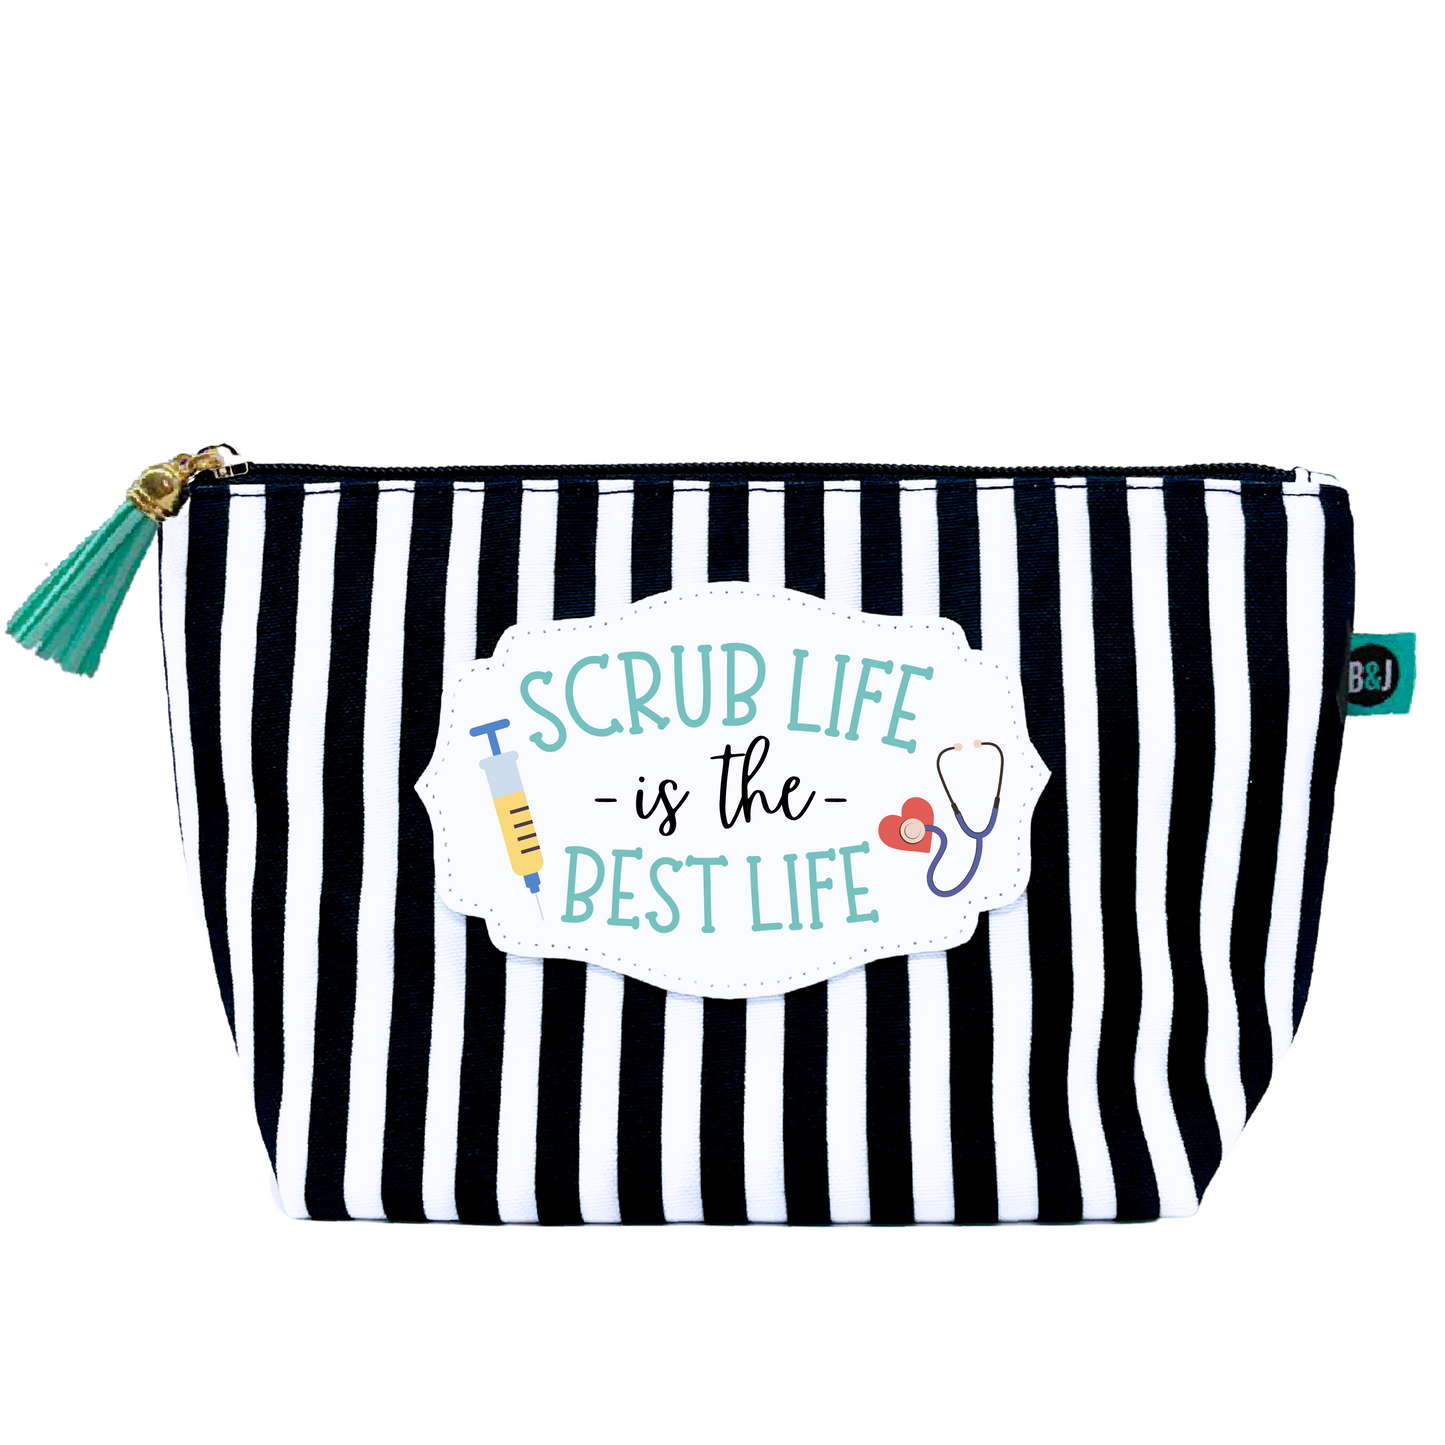 Scrub Life Janie Pouch Gifts for Women Striped Makeup Bags Cosmetic Bag Travel Toiletry Makeup Pouch Pencil Bag with Zipper Best Birthday Nurse Gifts